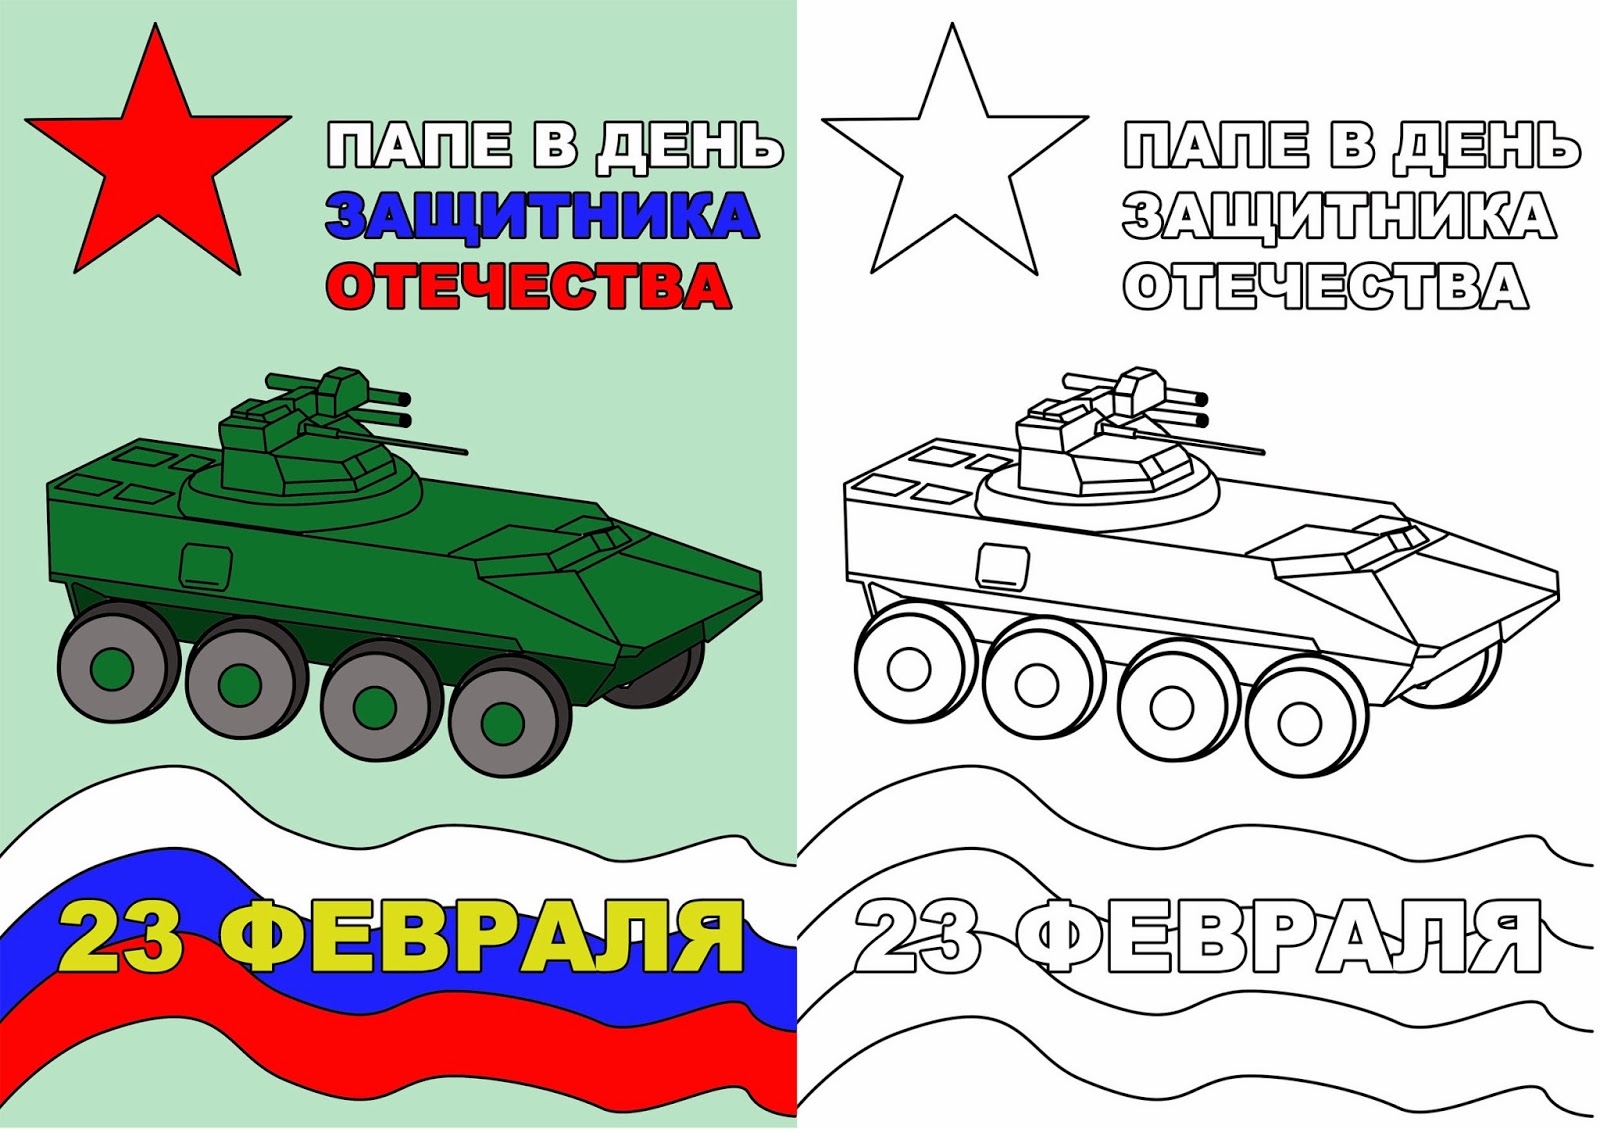 For preschoolers on Defender of the Fatherland Day #8